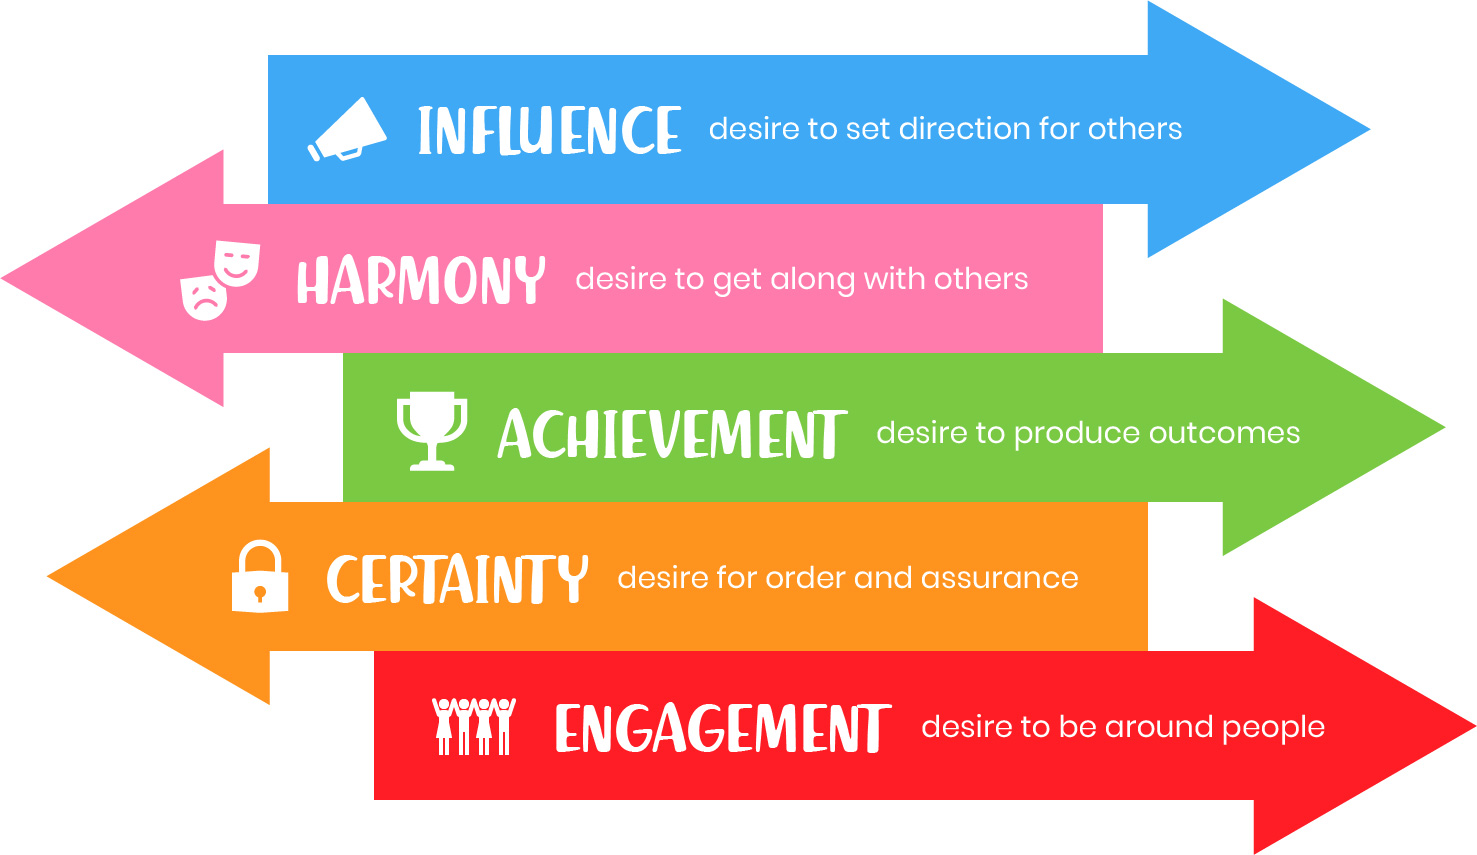 Images of the 5 motivations factors - Influence, Harmony, Achievement, Certainty and Engagement